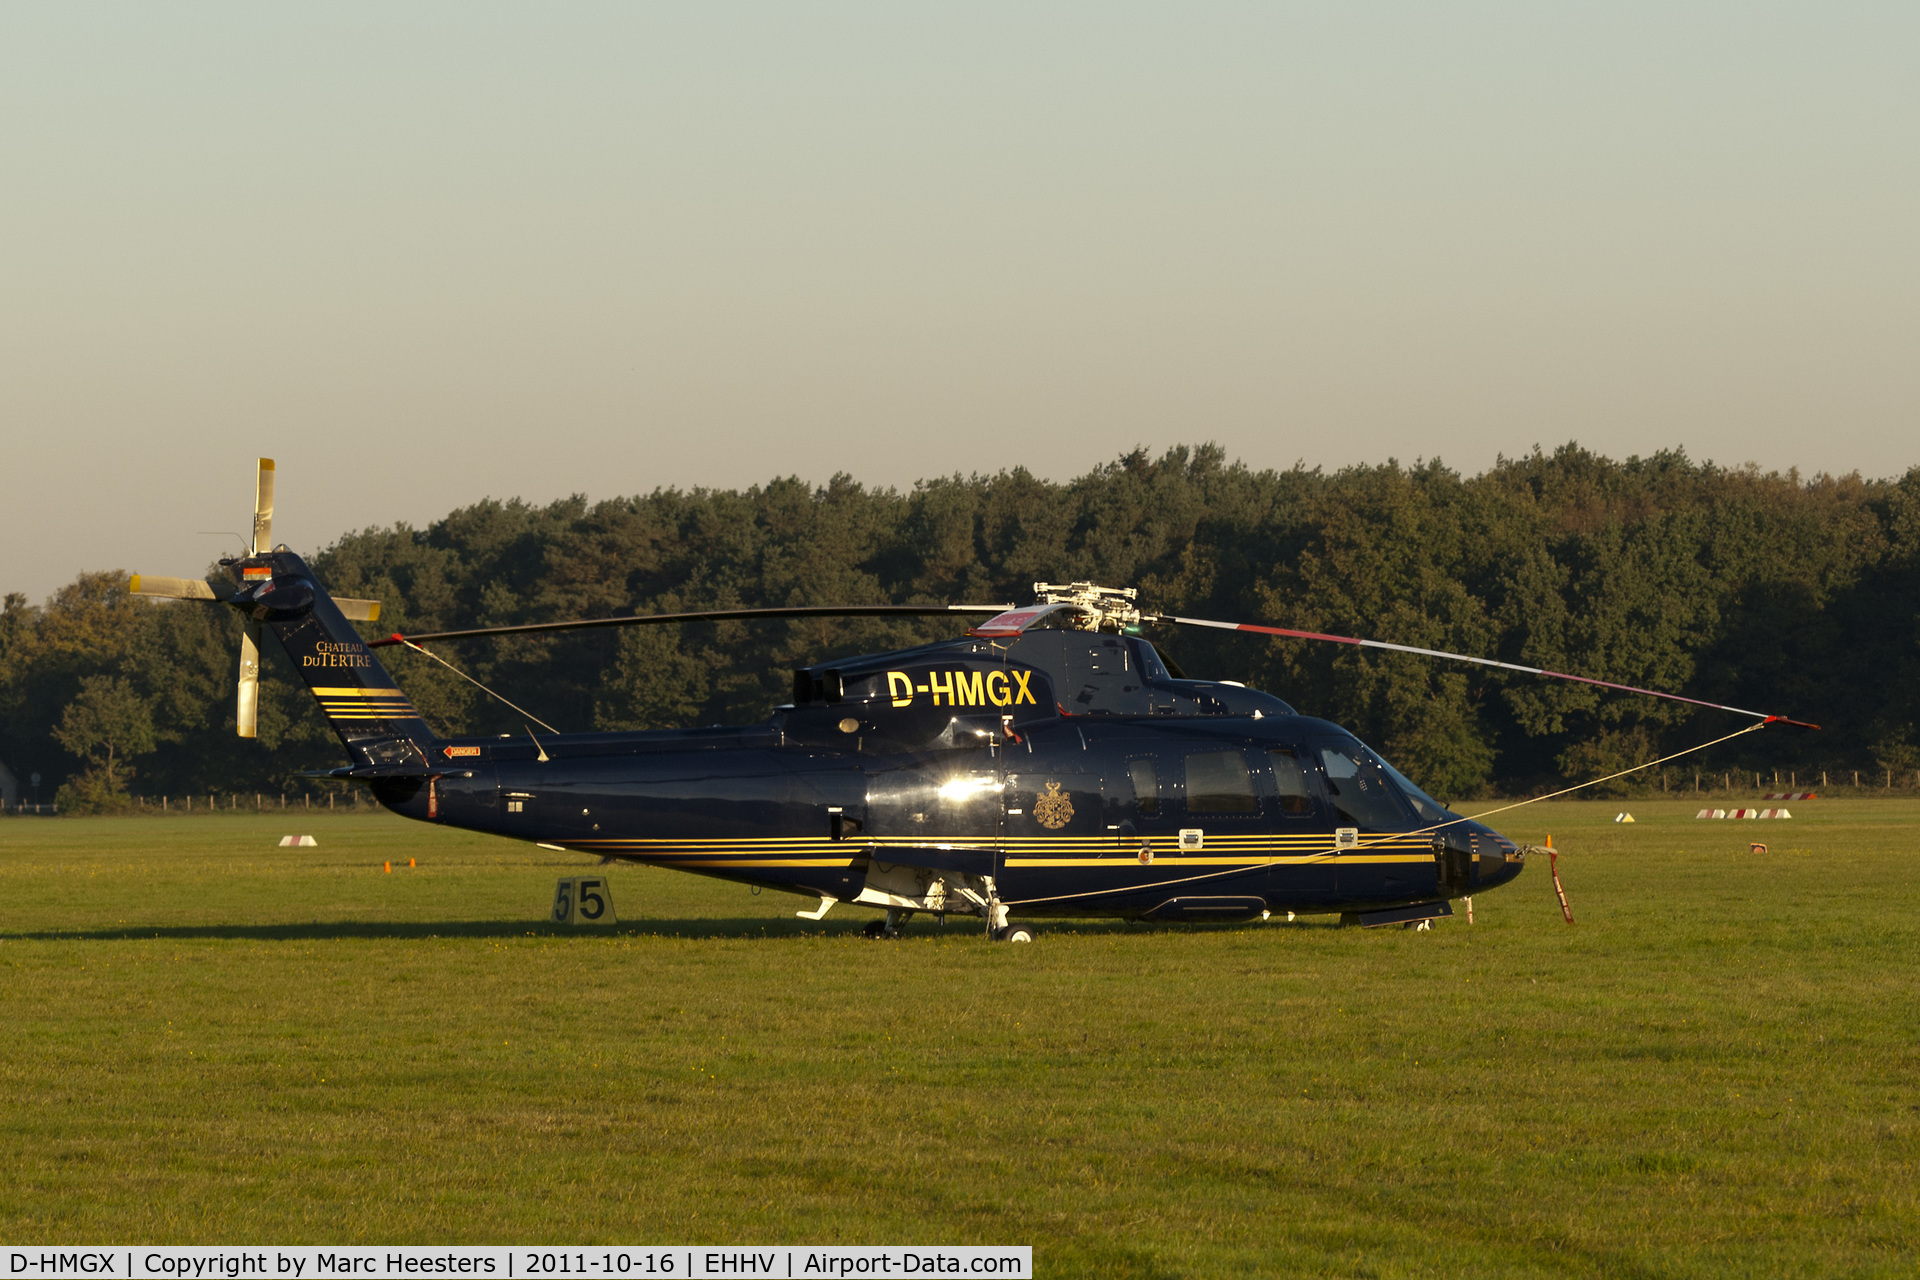 D-HMGX, 2008 Sikorsky S-76C C/N 760710, D-HMGX is seen about twice per year on the airfield of Hilversum.